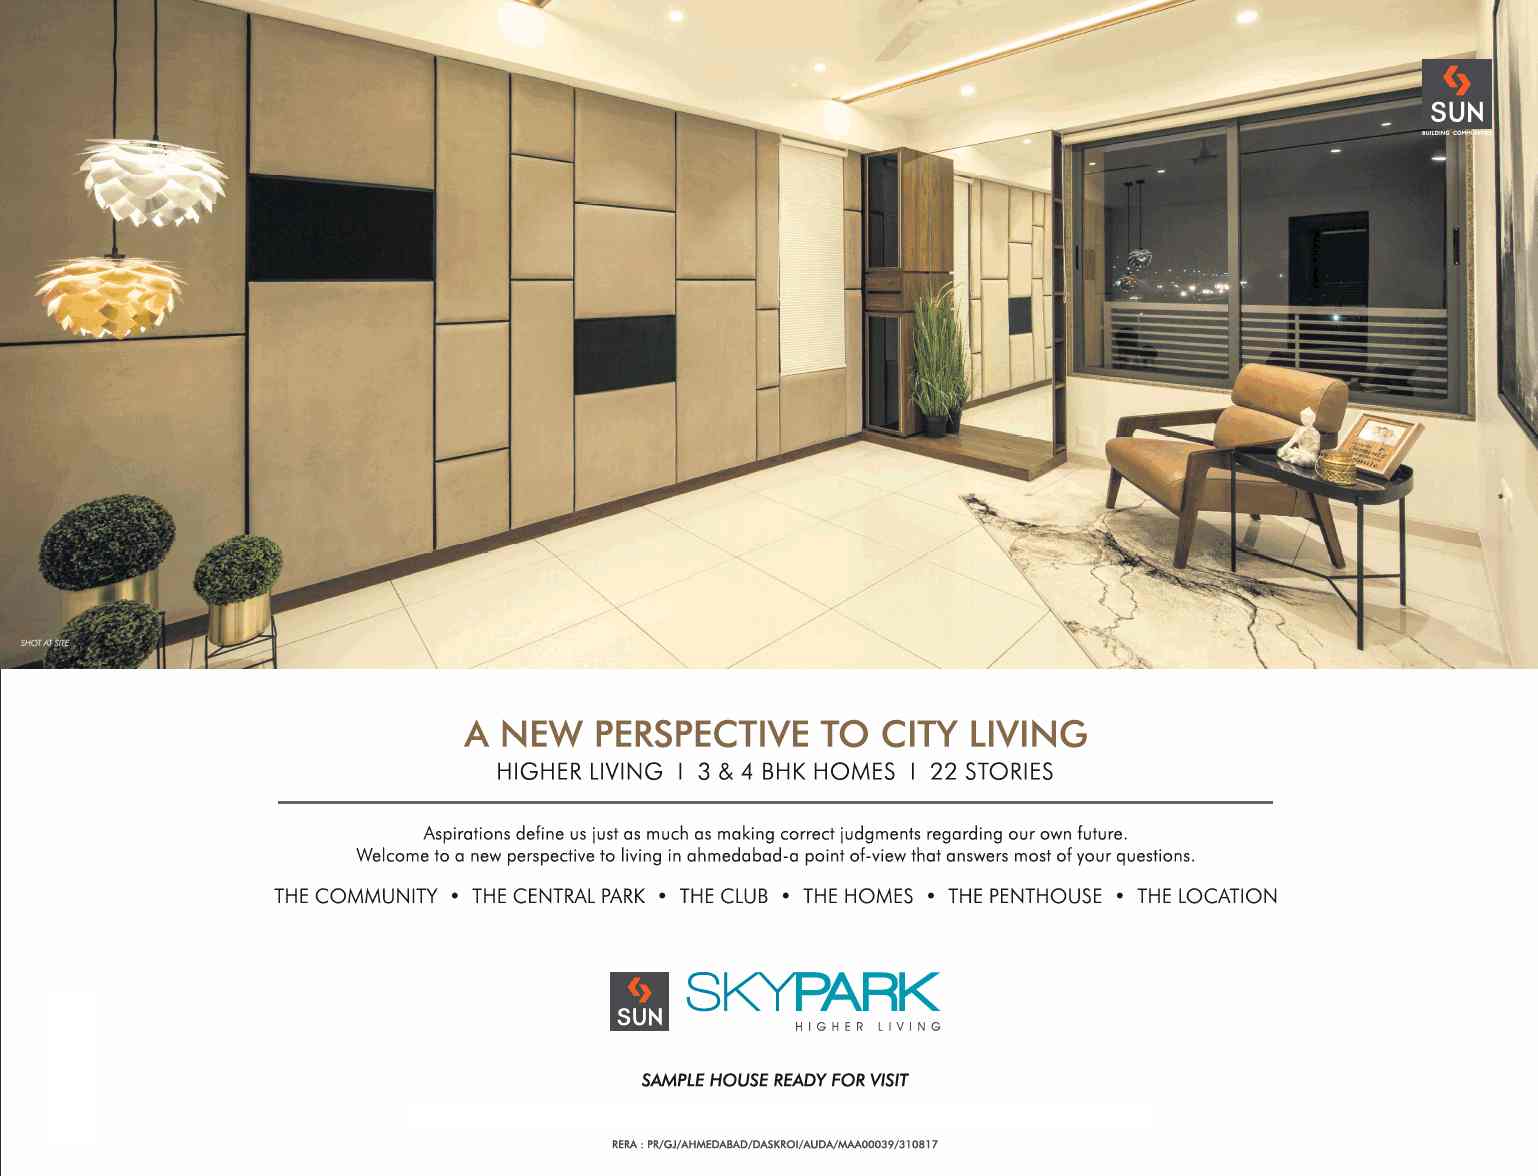 Sample house ready for visit at Sun Sky Park in Ahmedabad Update